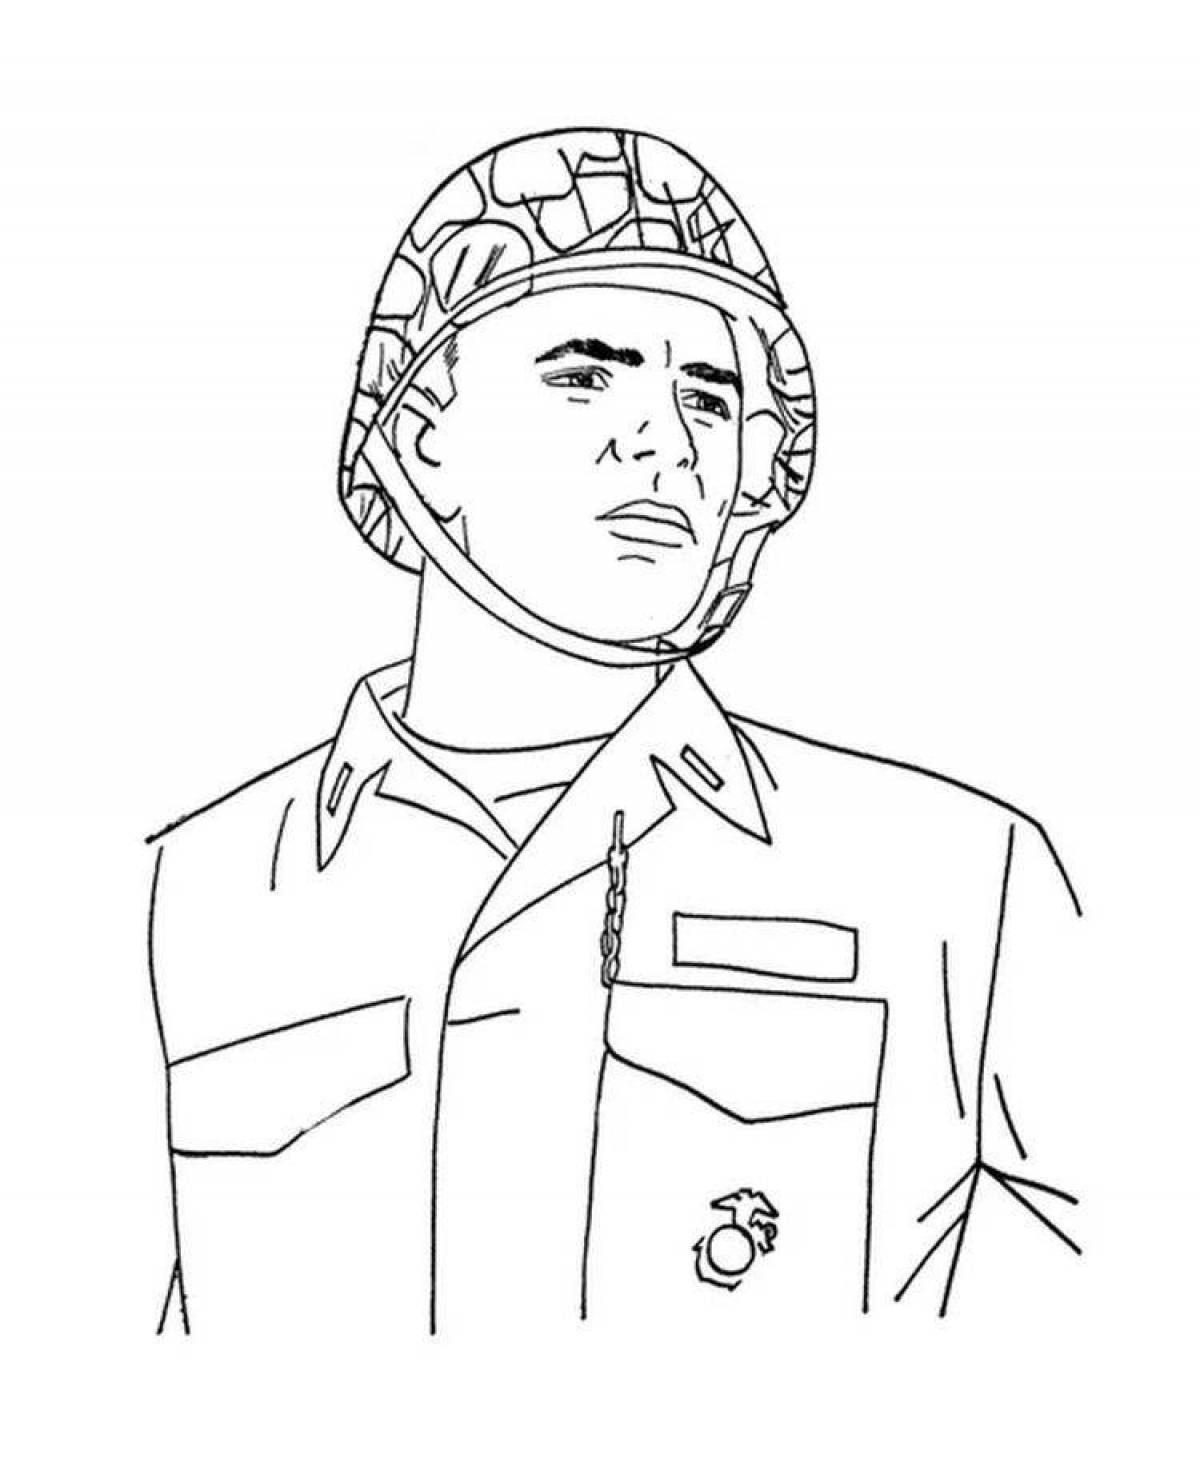 Impressive defenders of the fatherland coloring page